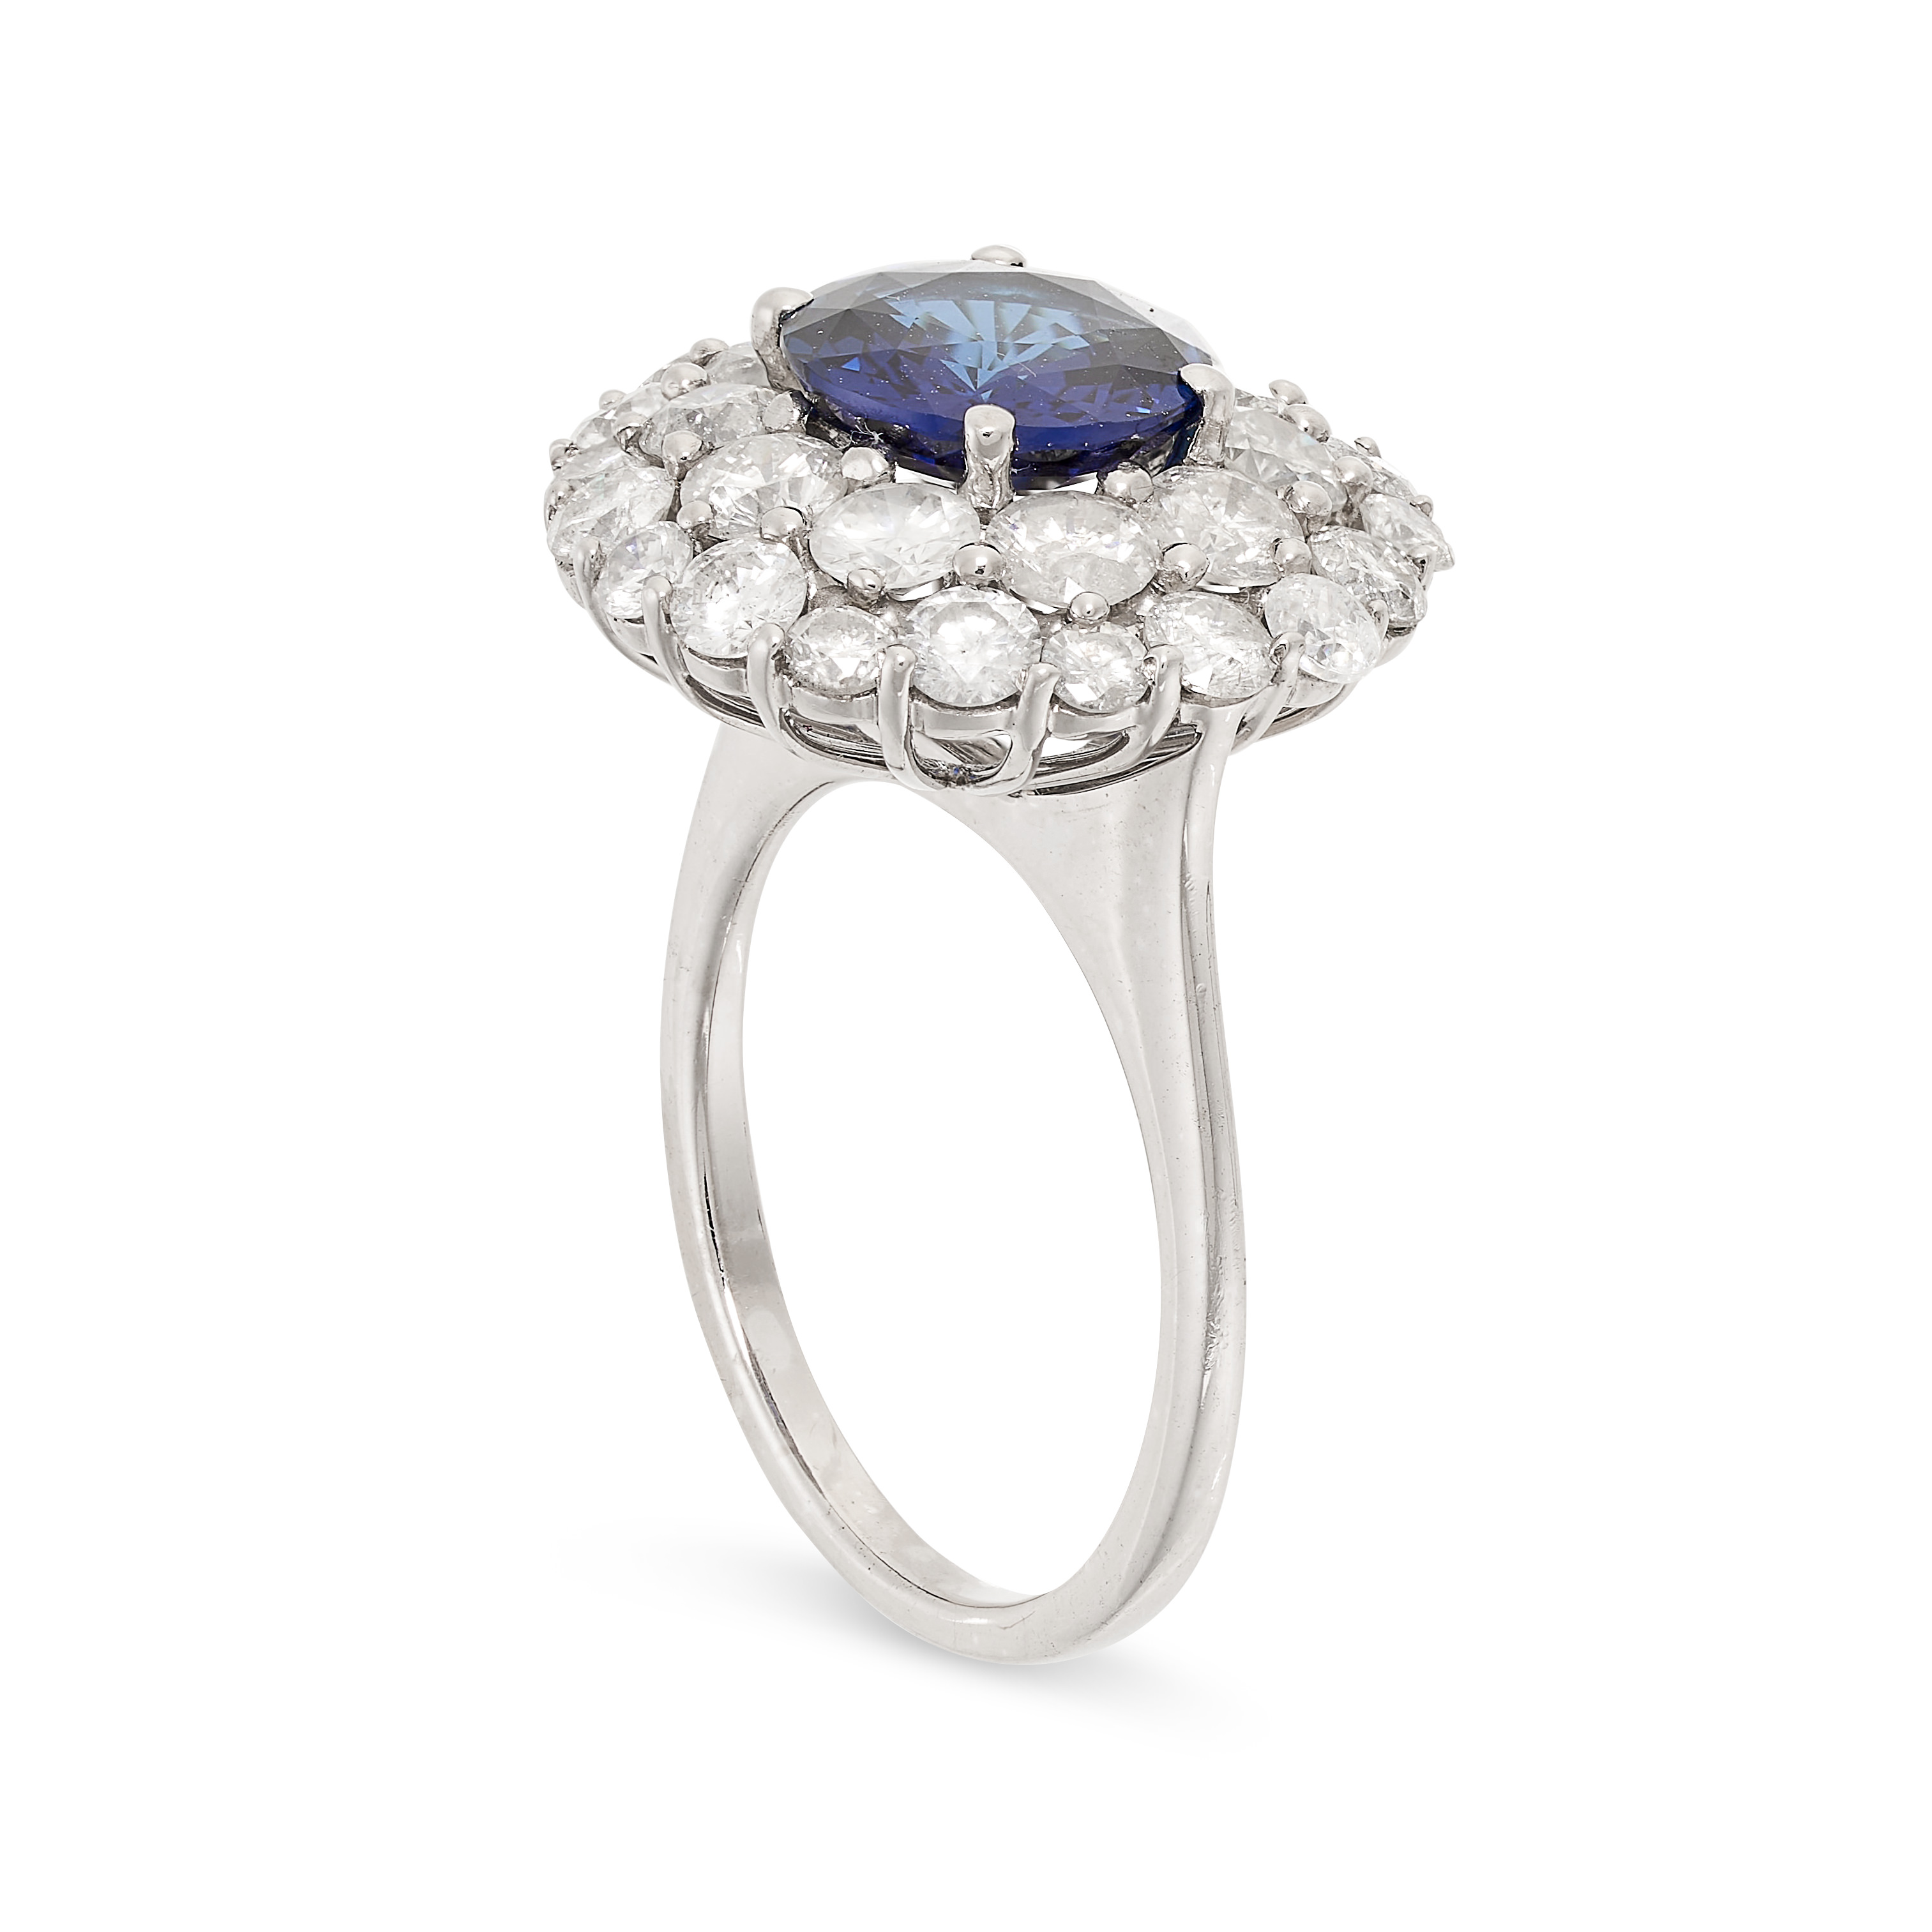 A SAPPHIRE AND DIAMOND CLUSTER RING in 18ct white gold, set with a round cut sapphire of 2.52 carats - Image 2 of 2